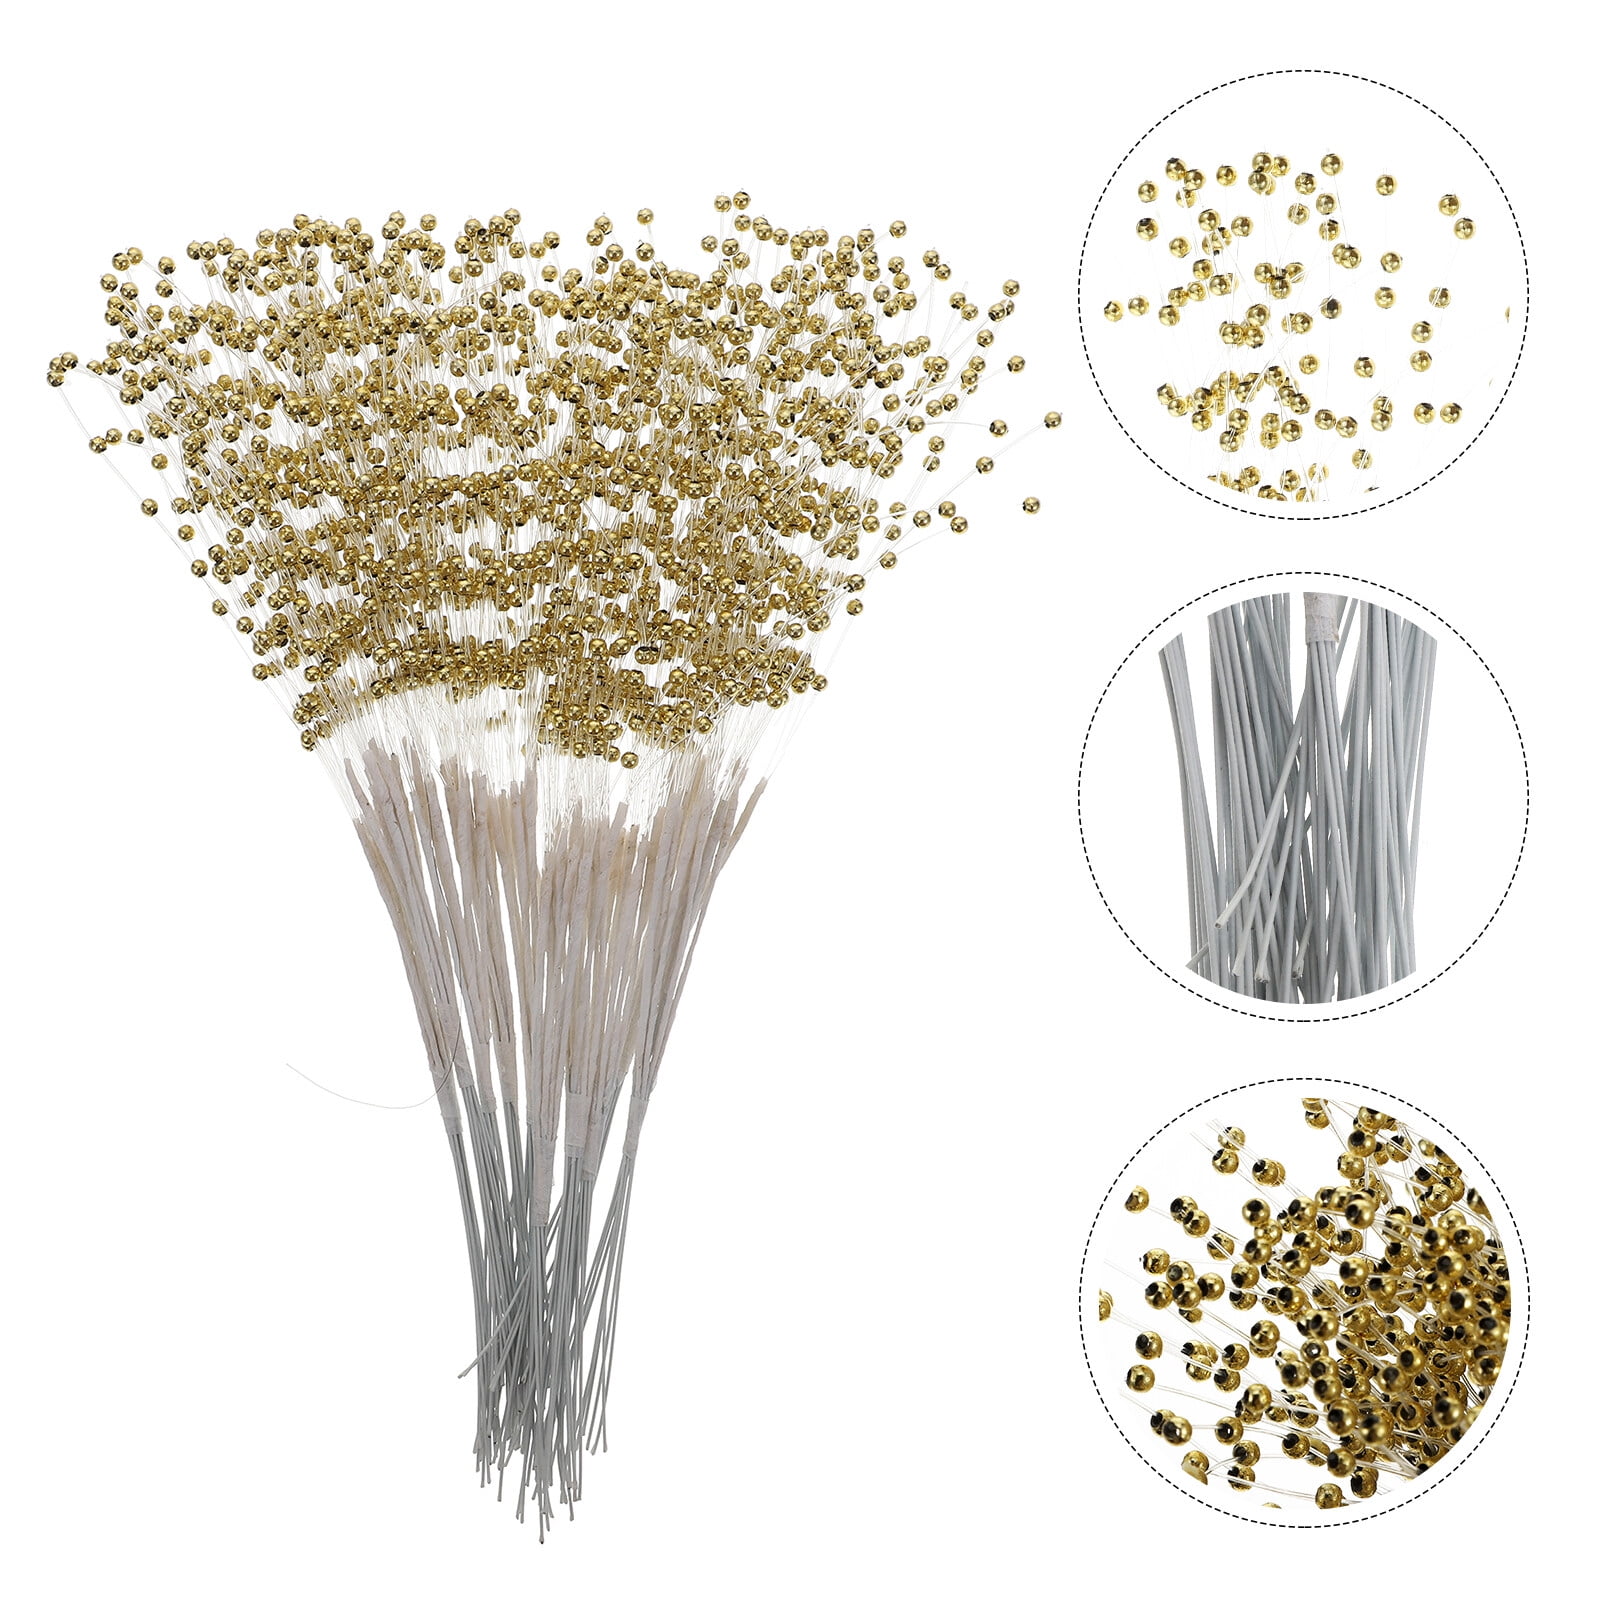  IMIKEYA Pearl Stick Stems Bouquets: 100pcs String Pearls  Sticks, 4mm Bead String Garland Pearls String Floral Beaded Sticks Picks  for Wedding Christmas Party Home Decor DIY Crafts : Arts, Crafts 